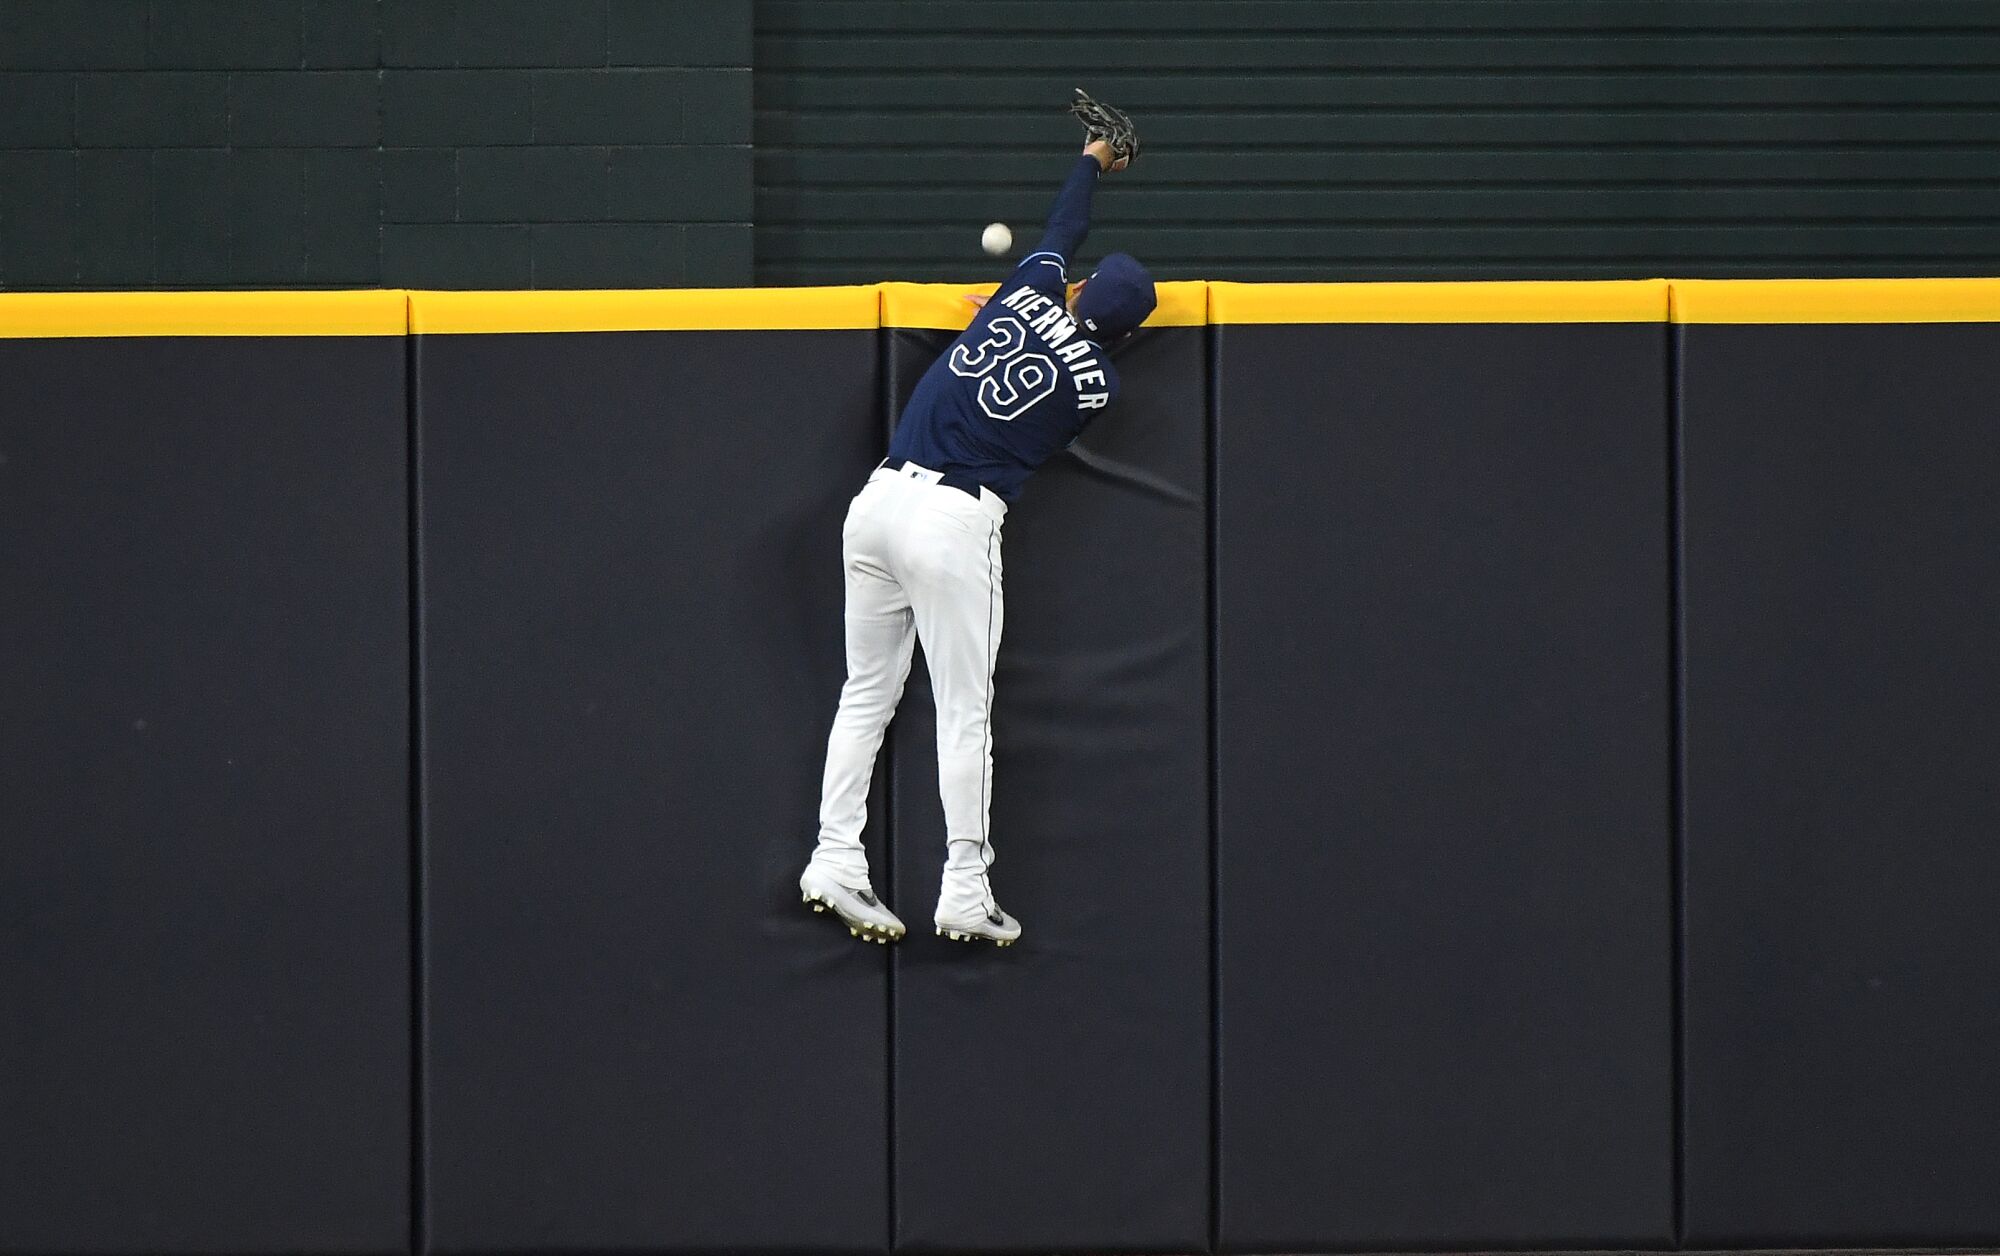 Tampa Bay Rays center fielder Kevin Kiermaier can't come up with a catch on a solo home run.